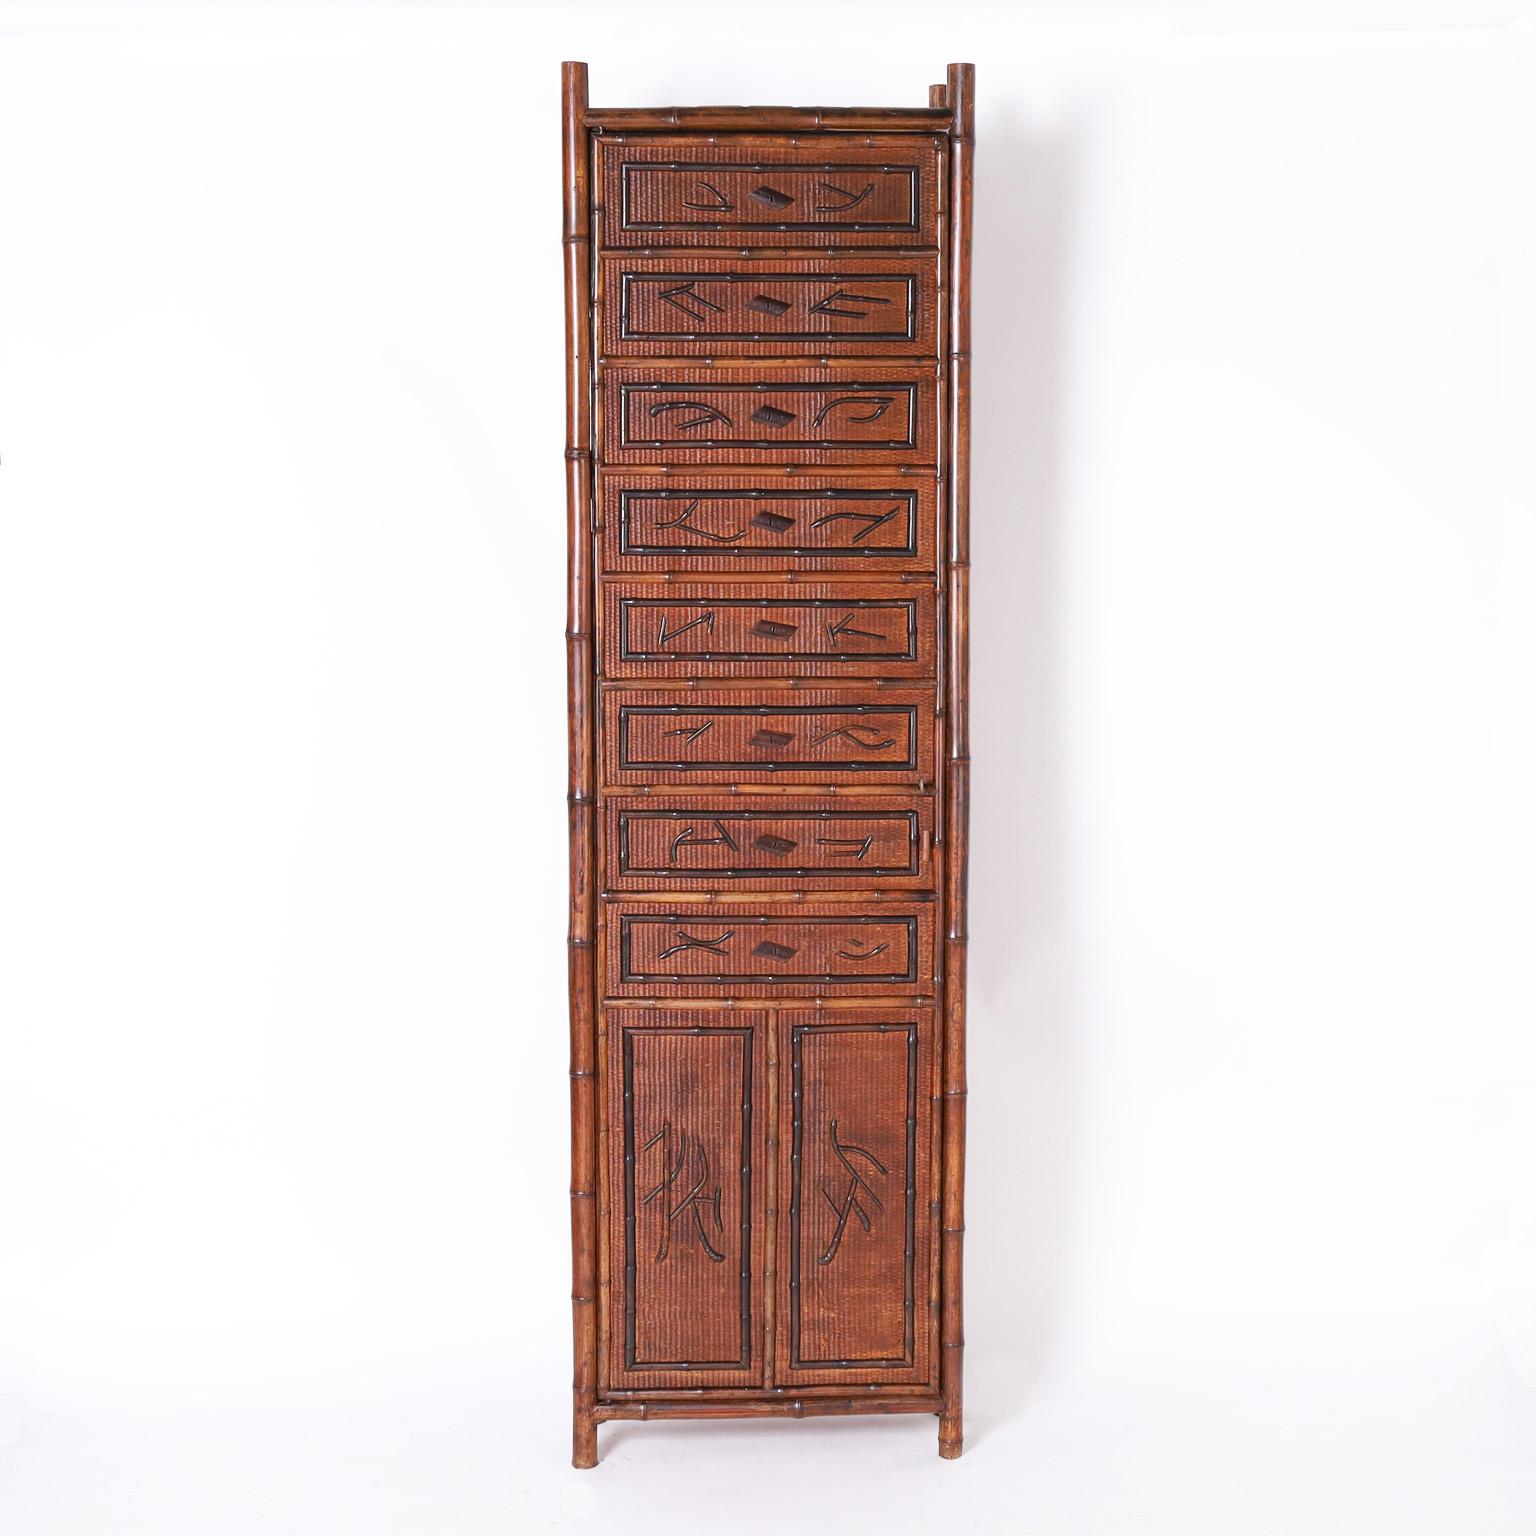 Tall handsome 19th century English cabinet crafted in a bamboo frame with grasscloth panels over wood with applied bamboo Japanese characters and borders. The interior is lined with a lovely Asian style floral wallpaper.